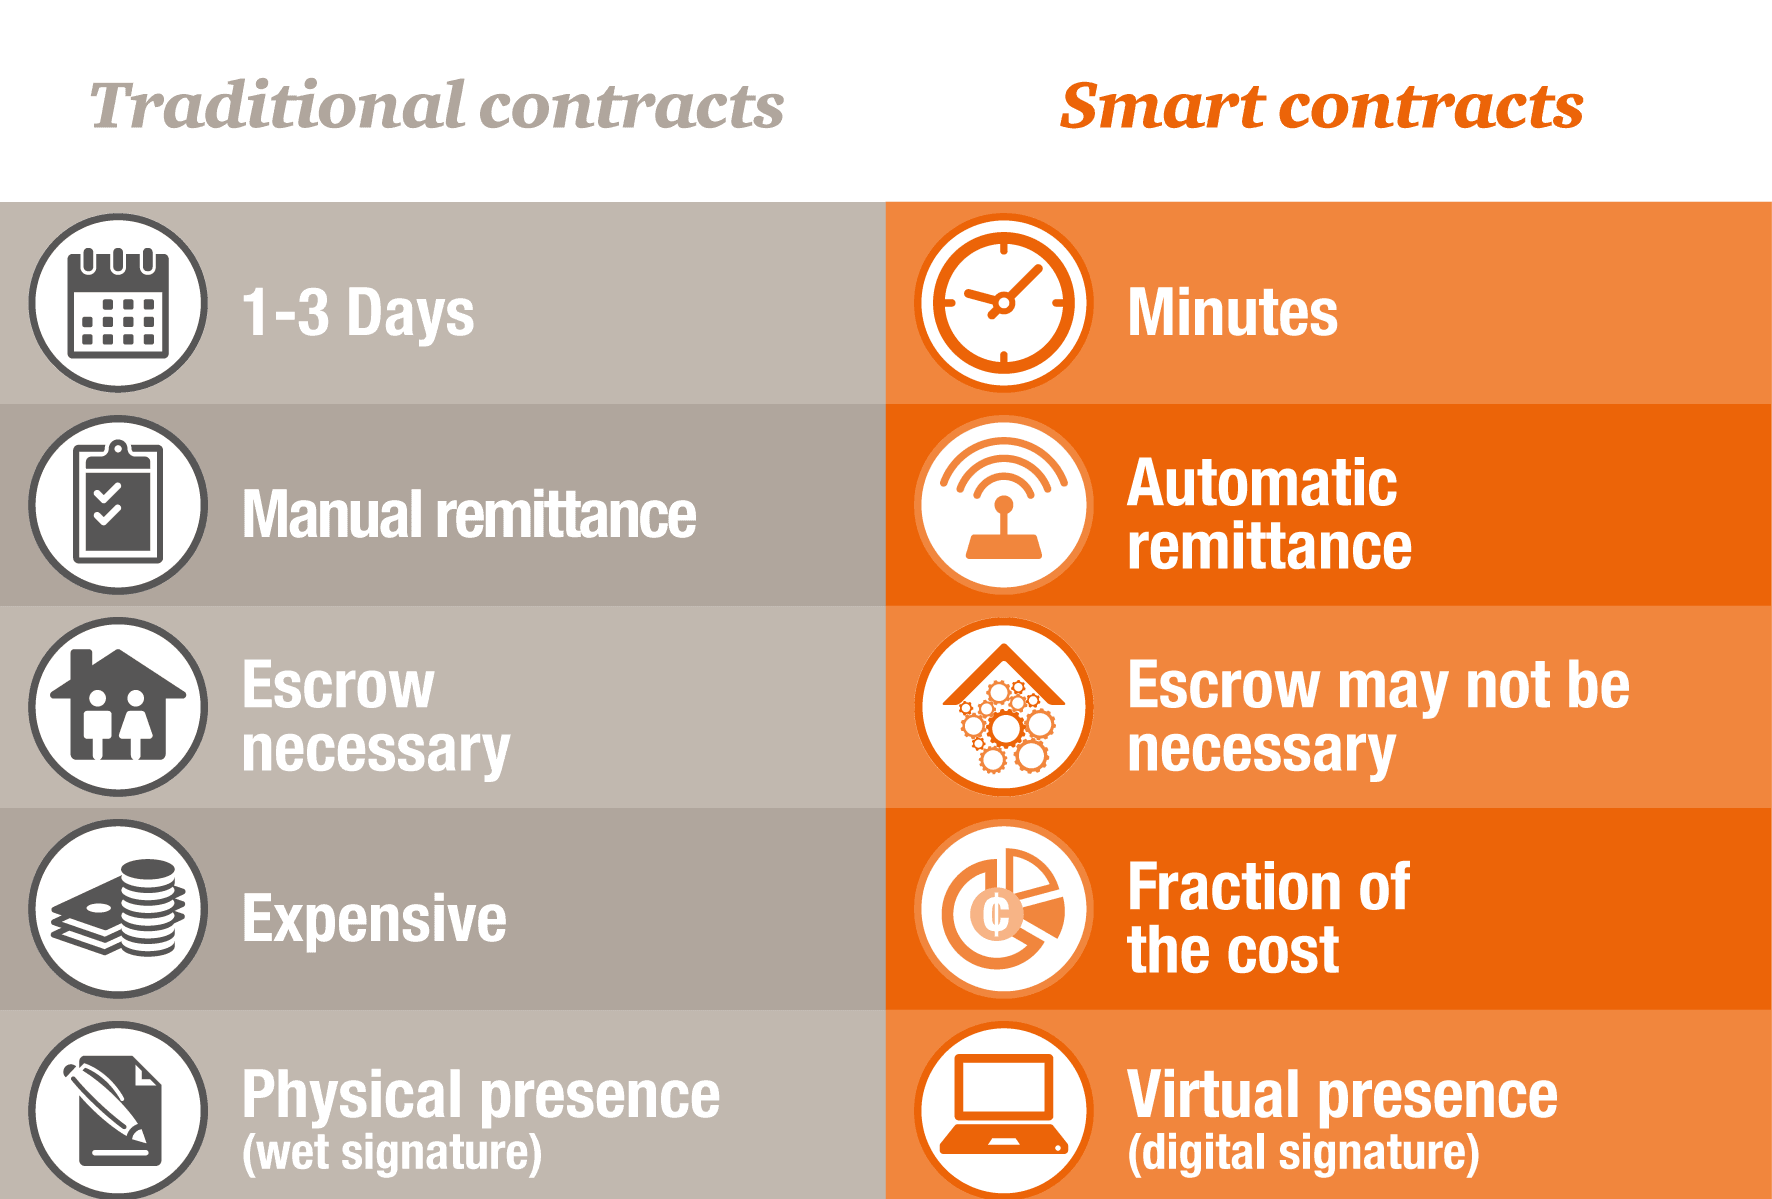 Like a traditional contract, a smart contract defines the rules and penalties around an agreement.